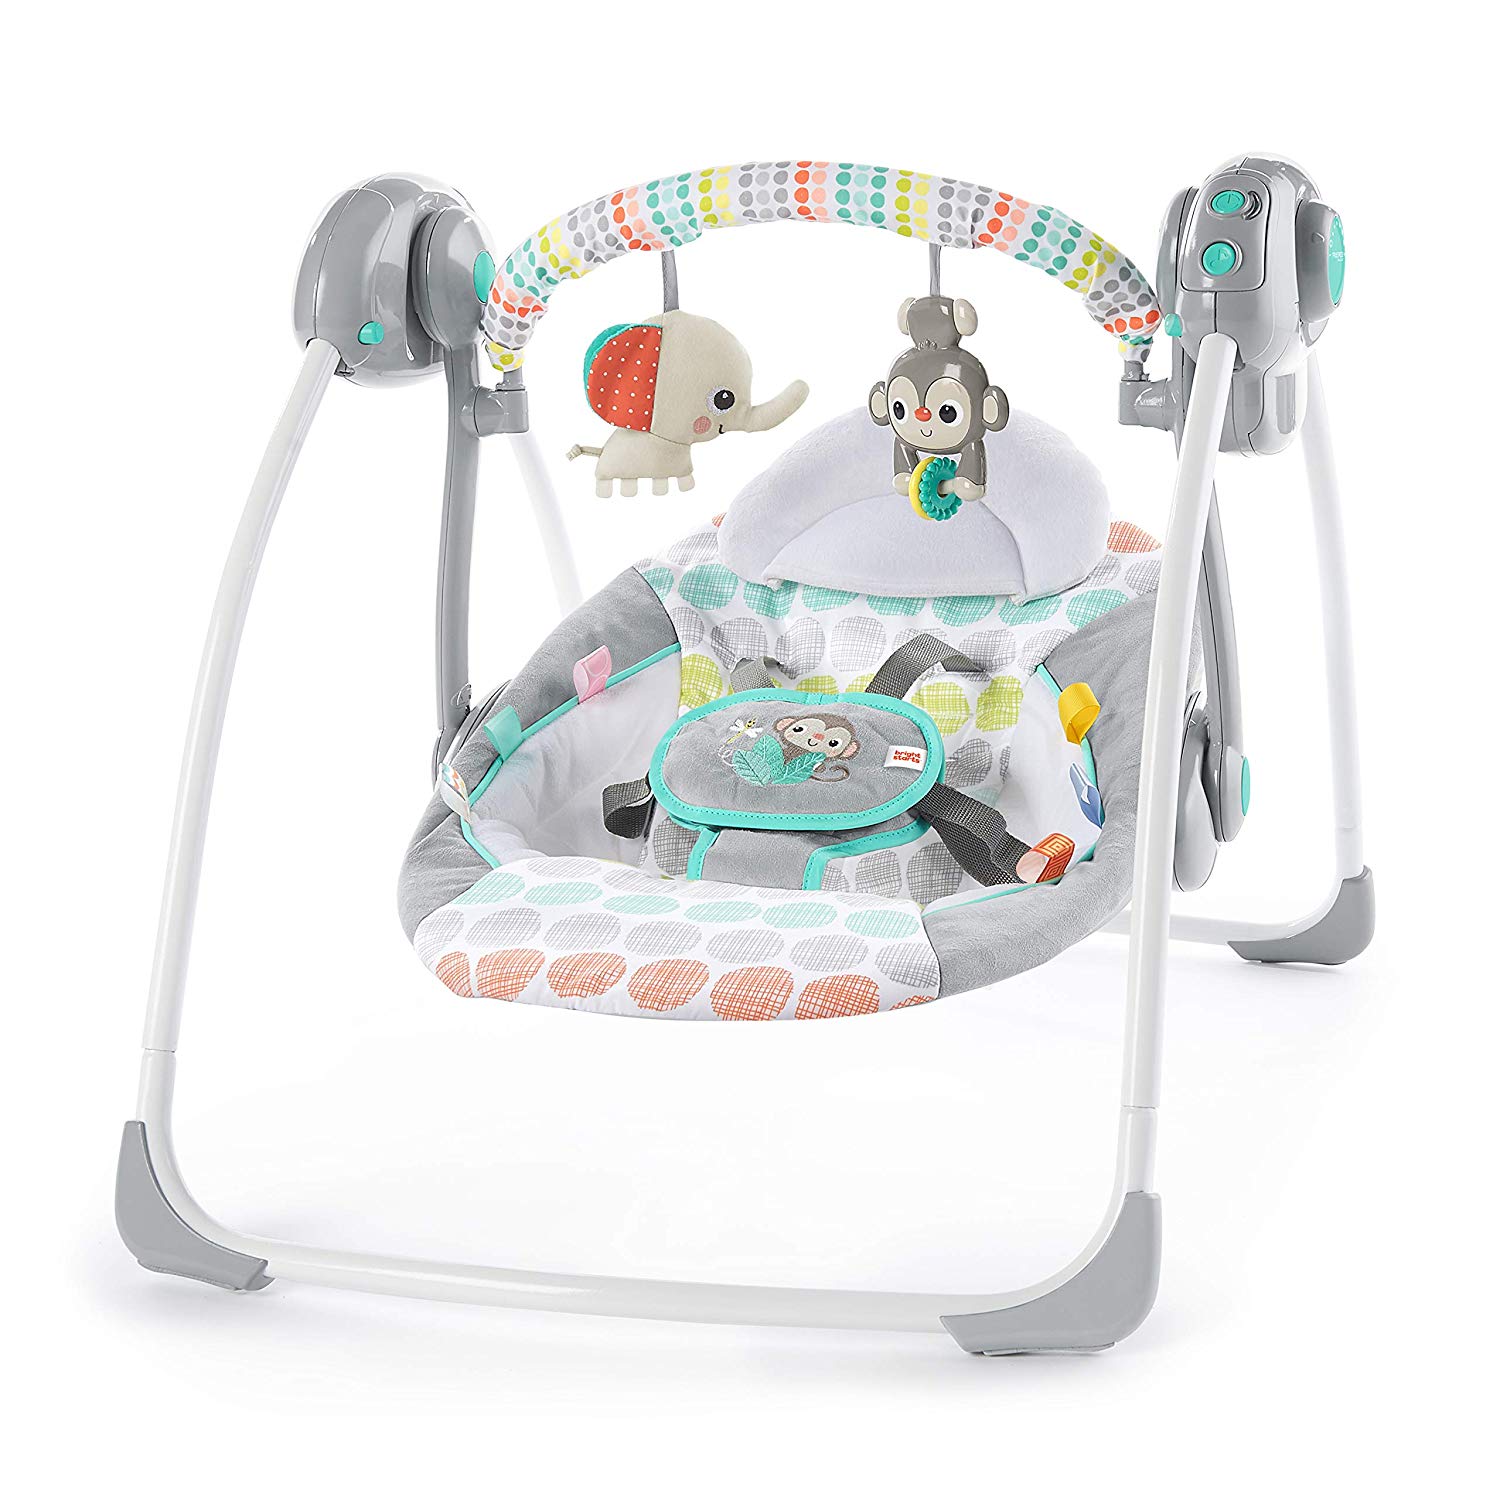 Bright Starts Whimsical Wild Portable Compact Automatic Swing